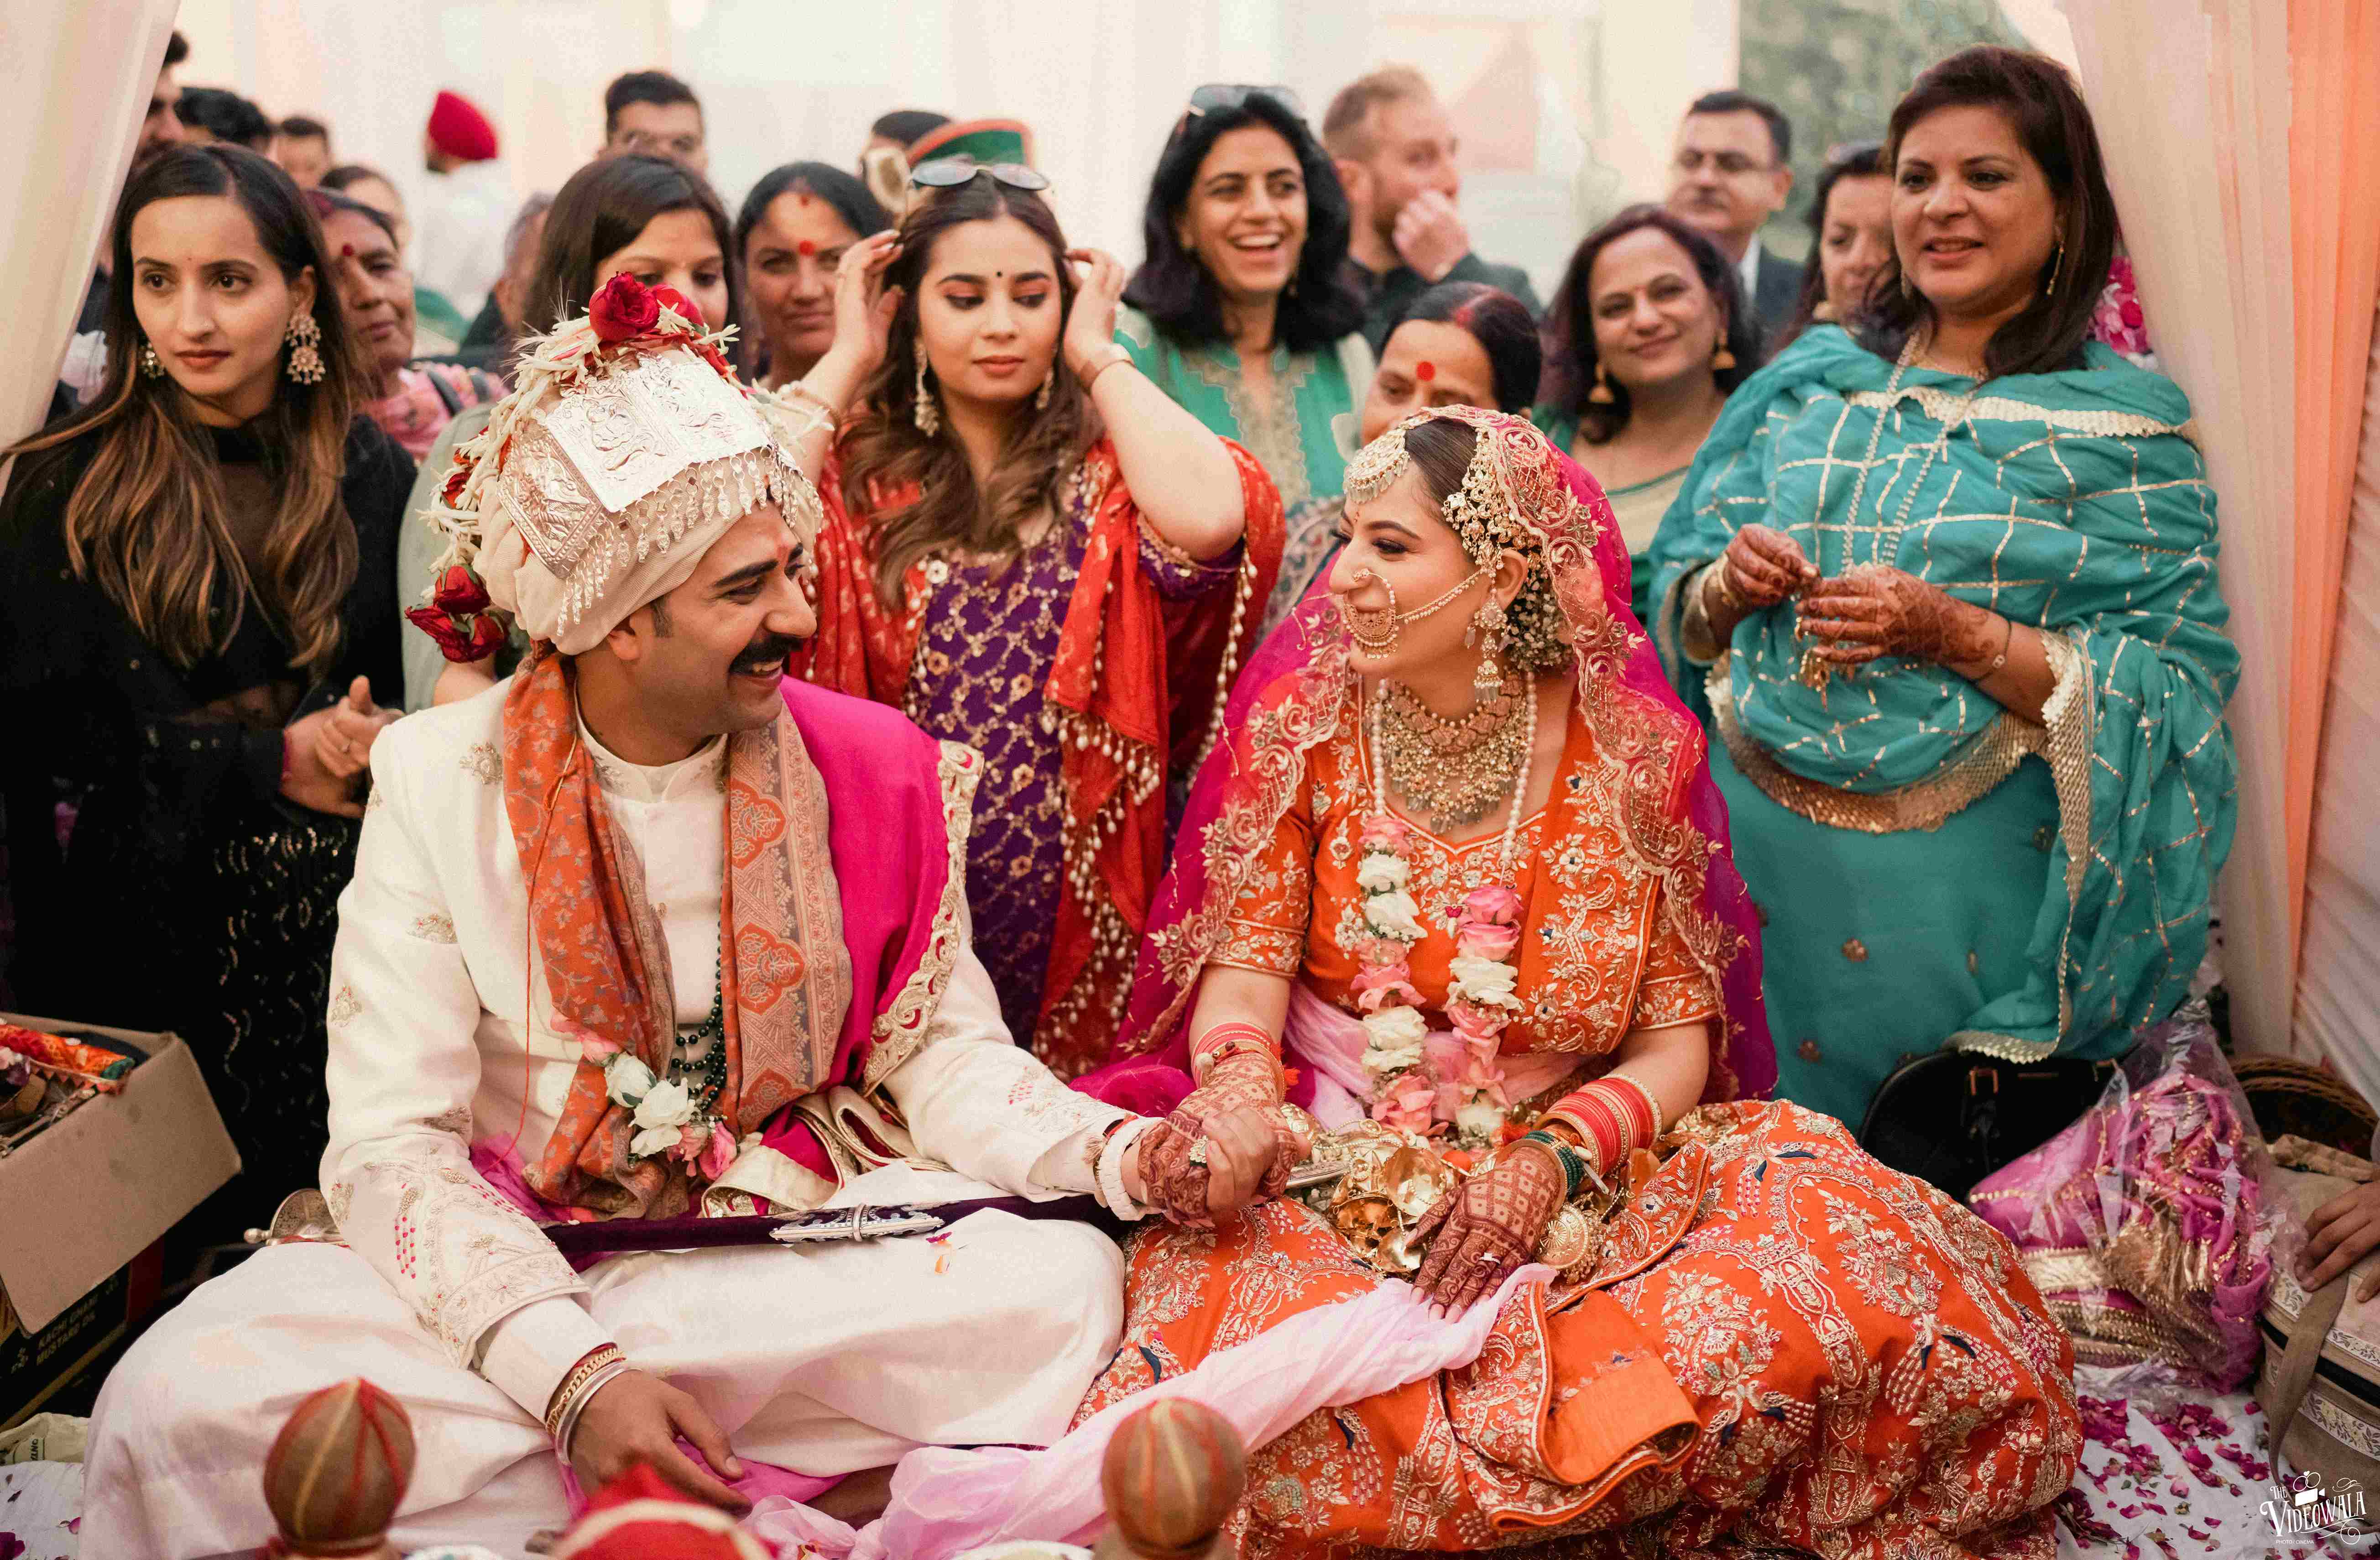 This Couple’s Pahadi Wedding Pictures Will Warm Your Heart